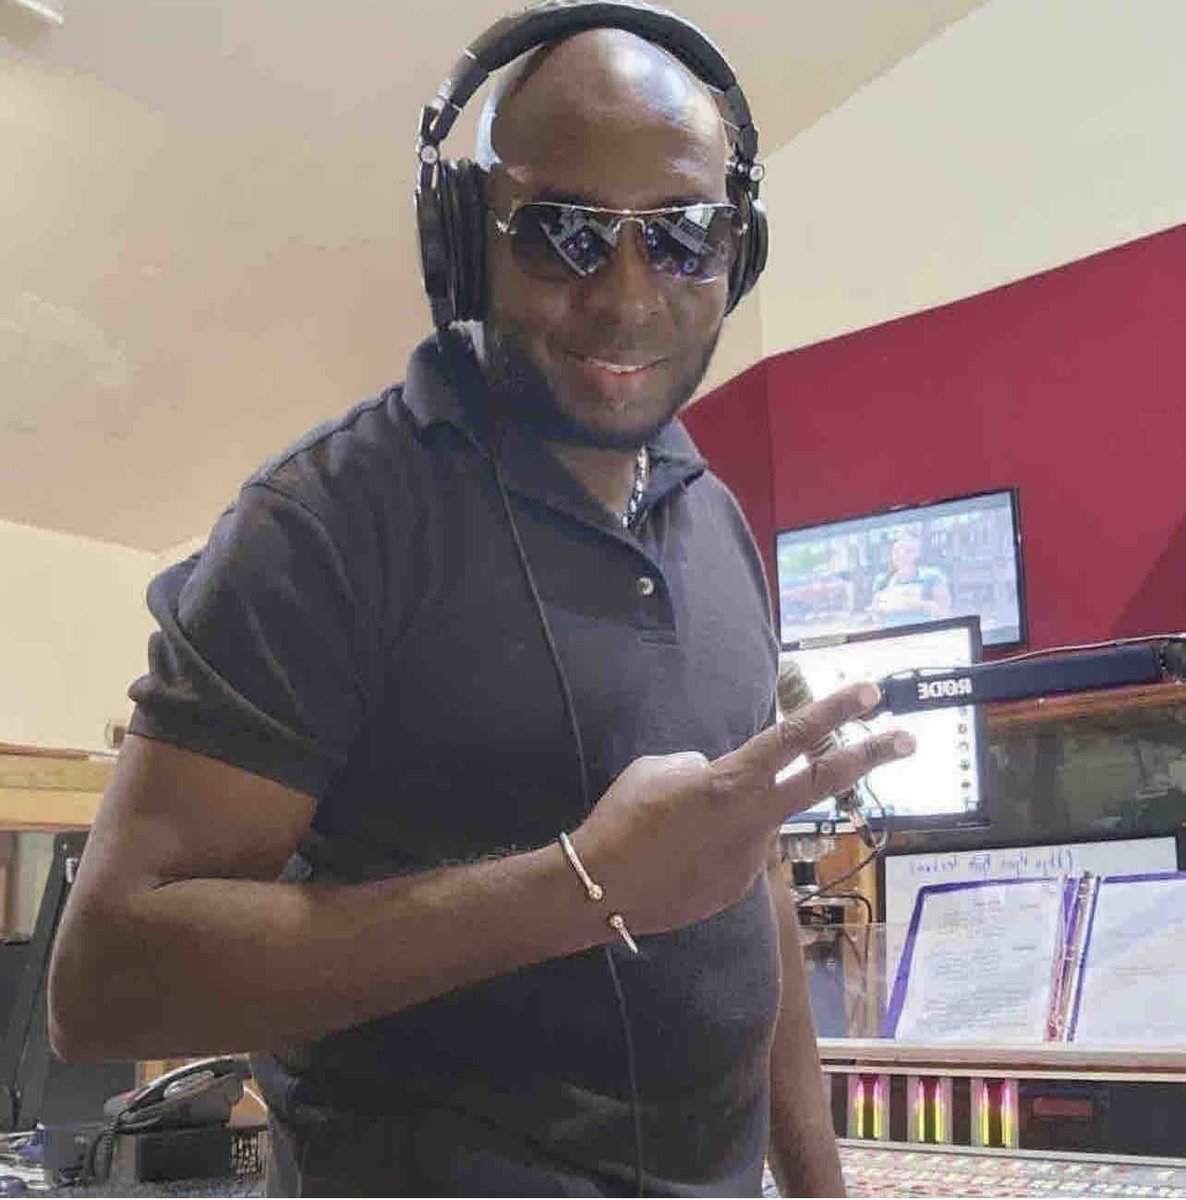 DJ Teddy is #LIVE now on the 107s with Free Up Saturday. Tune in now and  let's vibe. #iriefm #jamaica #music @djteddy876